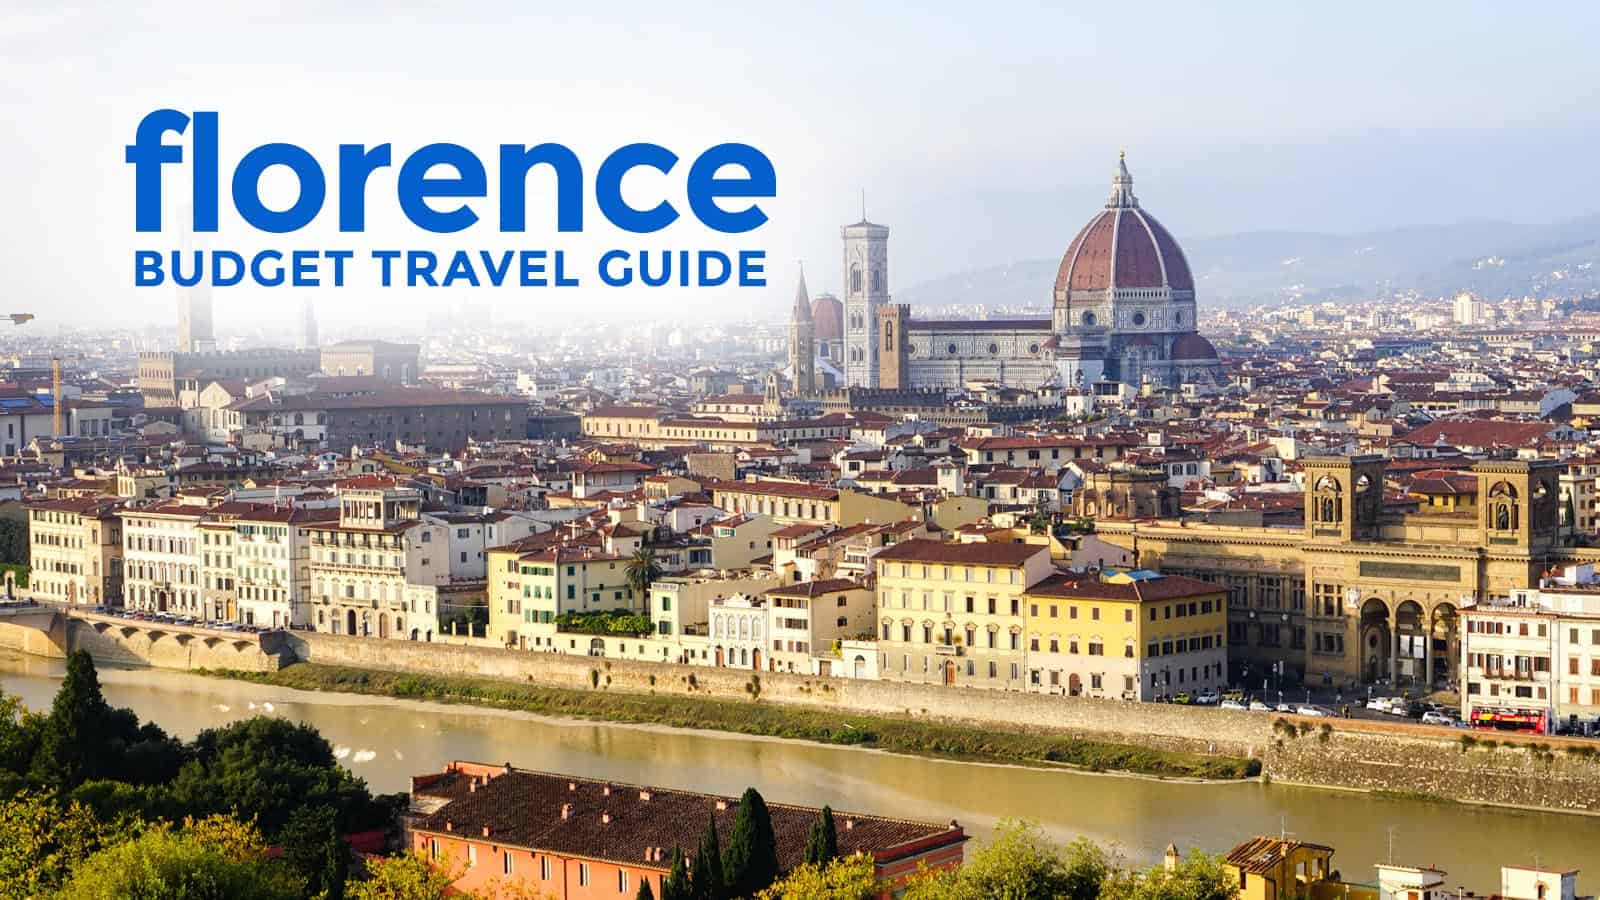 FLORENCE TRAVEL GUIDE: Itinerary, Budget & Things to Do